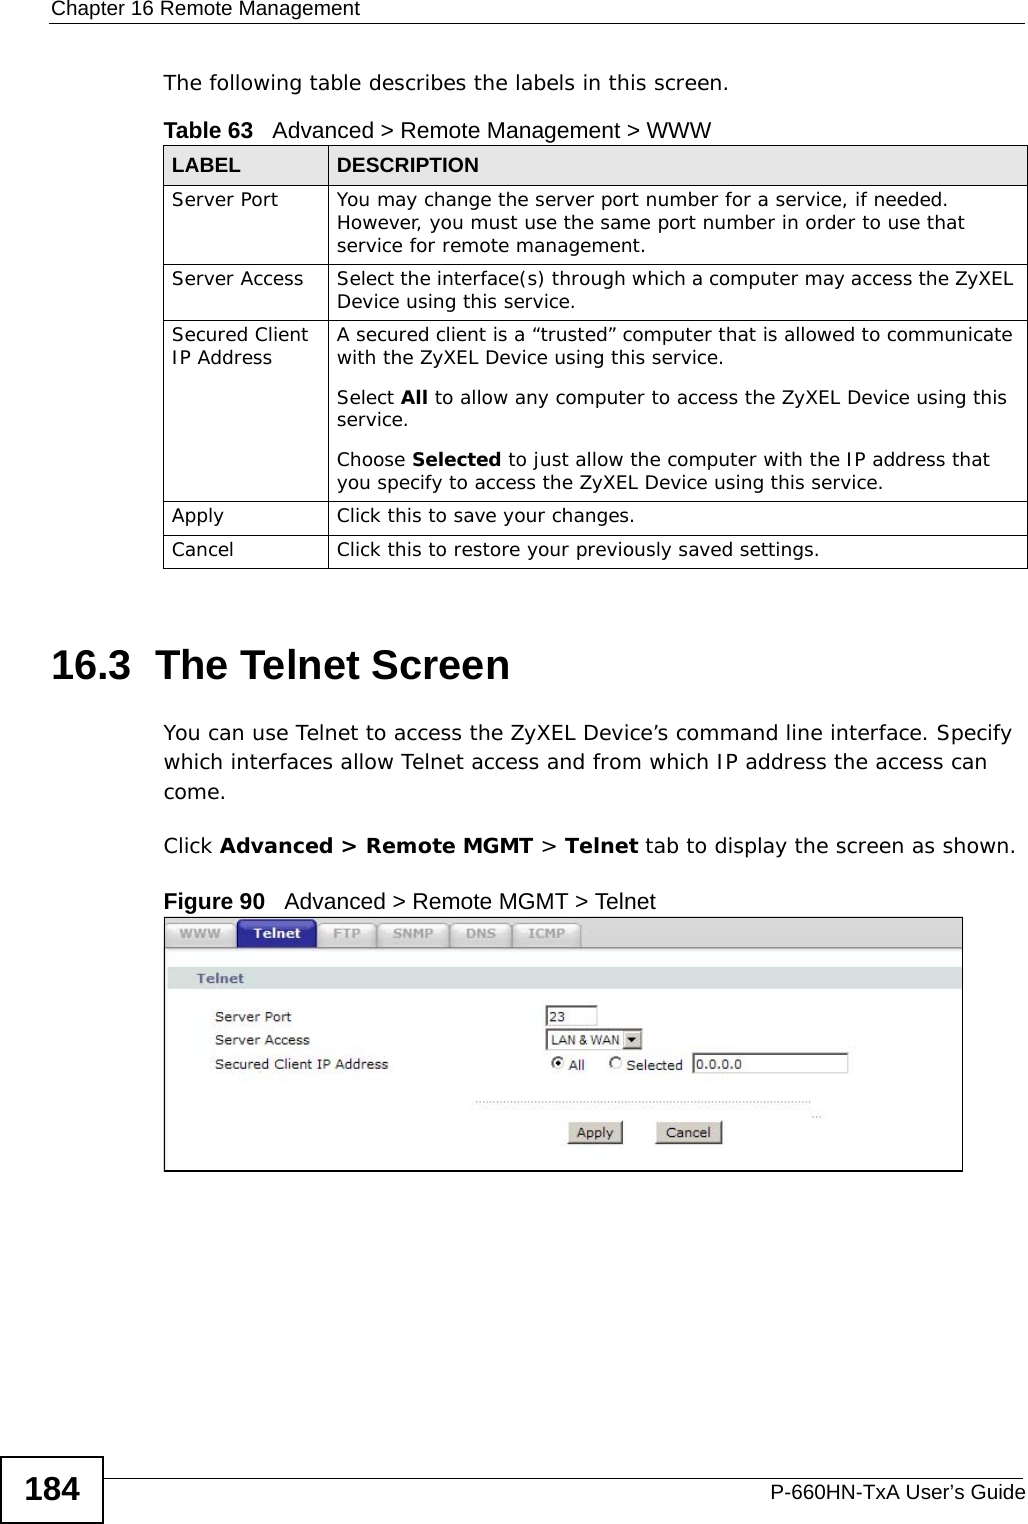 Chapter 16 Remote ManagementP-660HN-TxA User’s Guide184The following table describes the labels in this screen.16.3  The Telnet ScreenYou can use Telnet to access the ZyXEL Device’s command line interface. Specify which interfaces allow Telnet access and from which IP address the access can come.Click Advanced &gt; Remote MGMT &gt; Telnet tab to display the screen as shown. Figure 90   Advanced &gt; Remote MGMT &gt; TelnetTable 63   Advanced &gt; Remote Management &gt; WWWLABEL DESCRIPTIONServer Port You may change the server port number for a service, if needed. However, you must use the same port number in order to use that service for remote management.Server Access Select the interface(s) through which a computer may access the ZyXEL Device using this service.Secured Client IP Address A secured client is a “trusted” computer that is allowed to communicate with the ZyXEL Device using this service. Select All to allow any computer to access the ZyXEL Device using this service.Choose Selected to just allow the computer with the IP address that you specify to access the ZyXEL Device using this service.Apply Click this to save your changes.Cancel Click this to restore your previously saved settings.